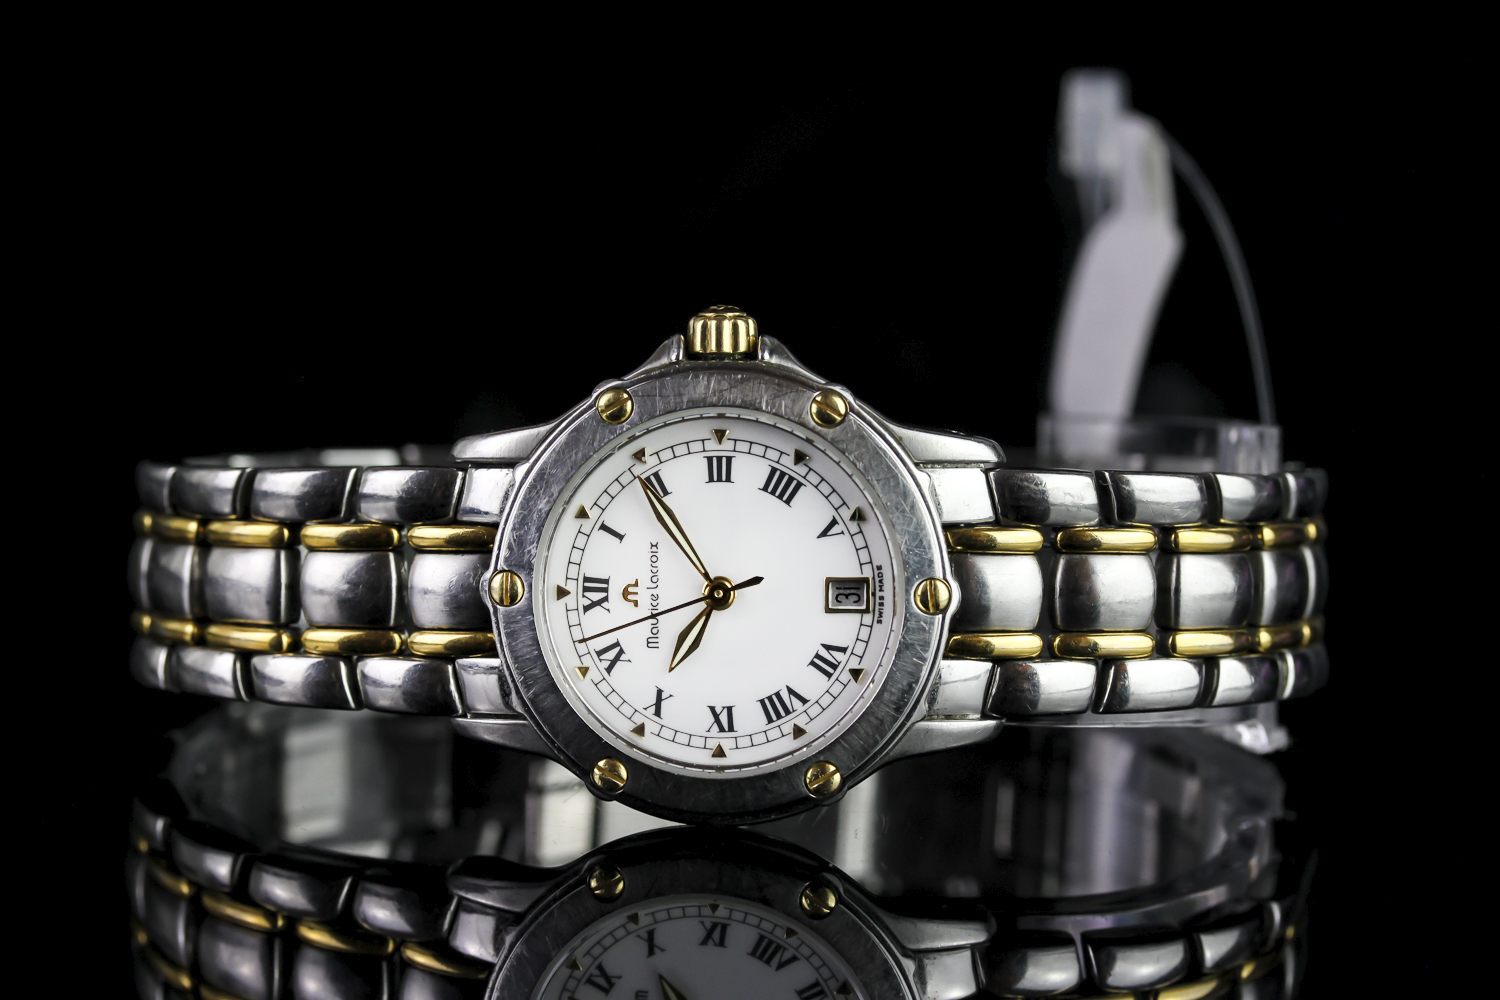 LADIES MAURICE LACROIX 13917,round,white dial with illuminated hands, black roman numeral markers,